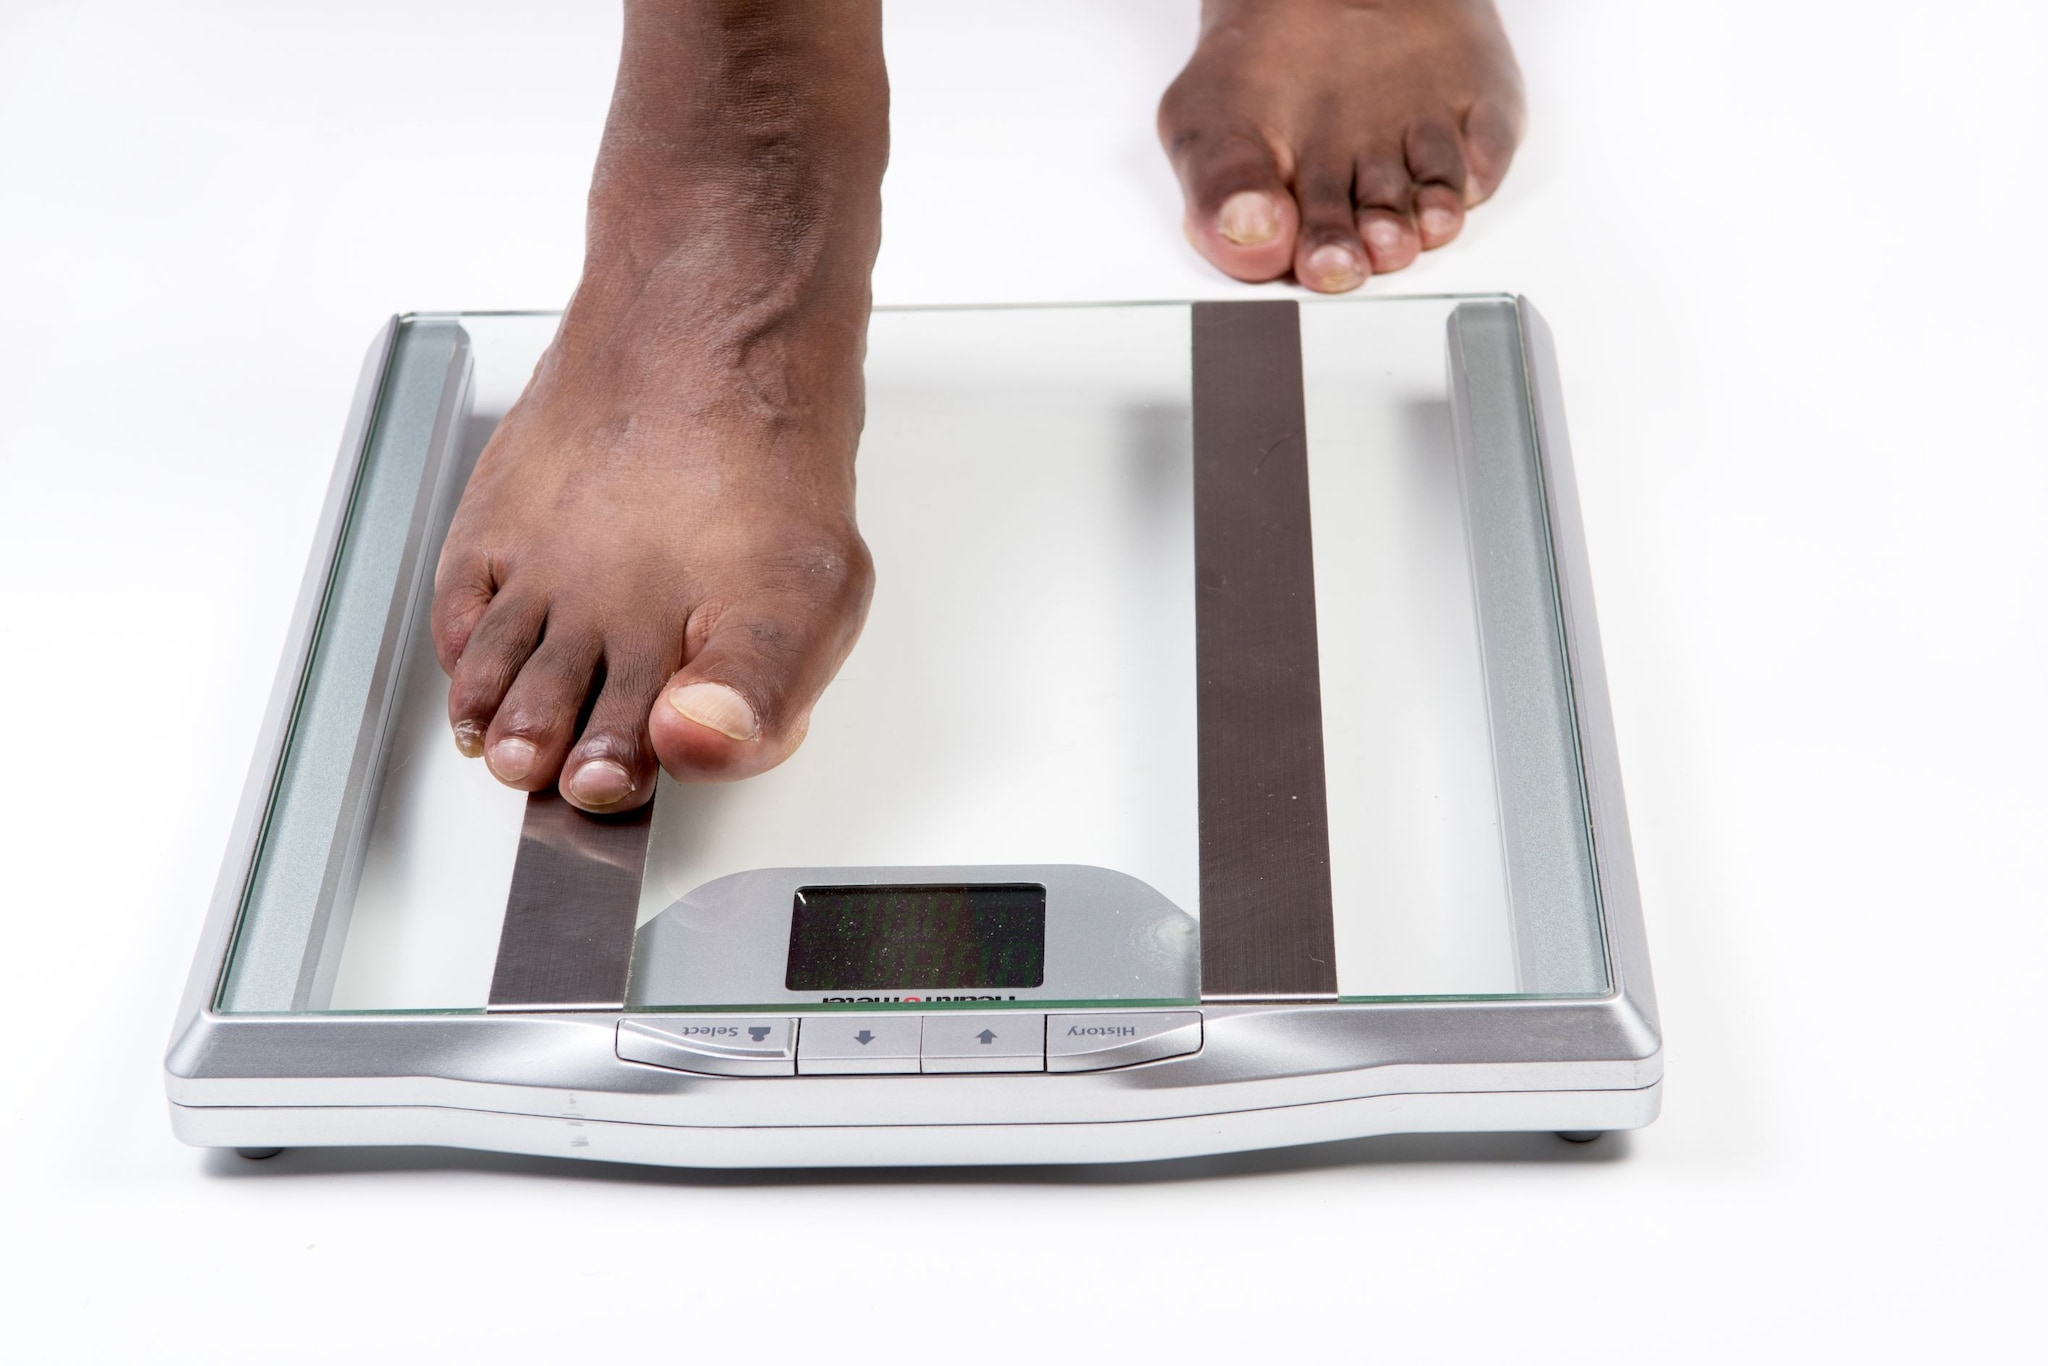 https://www.cdc.gov/healthyweight/images/assessing/AA-male-stepping-on-scales.jpg?_=46947